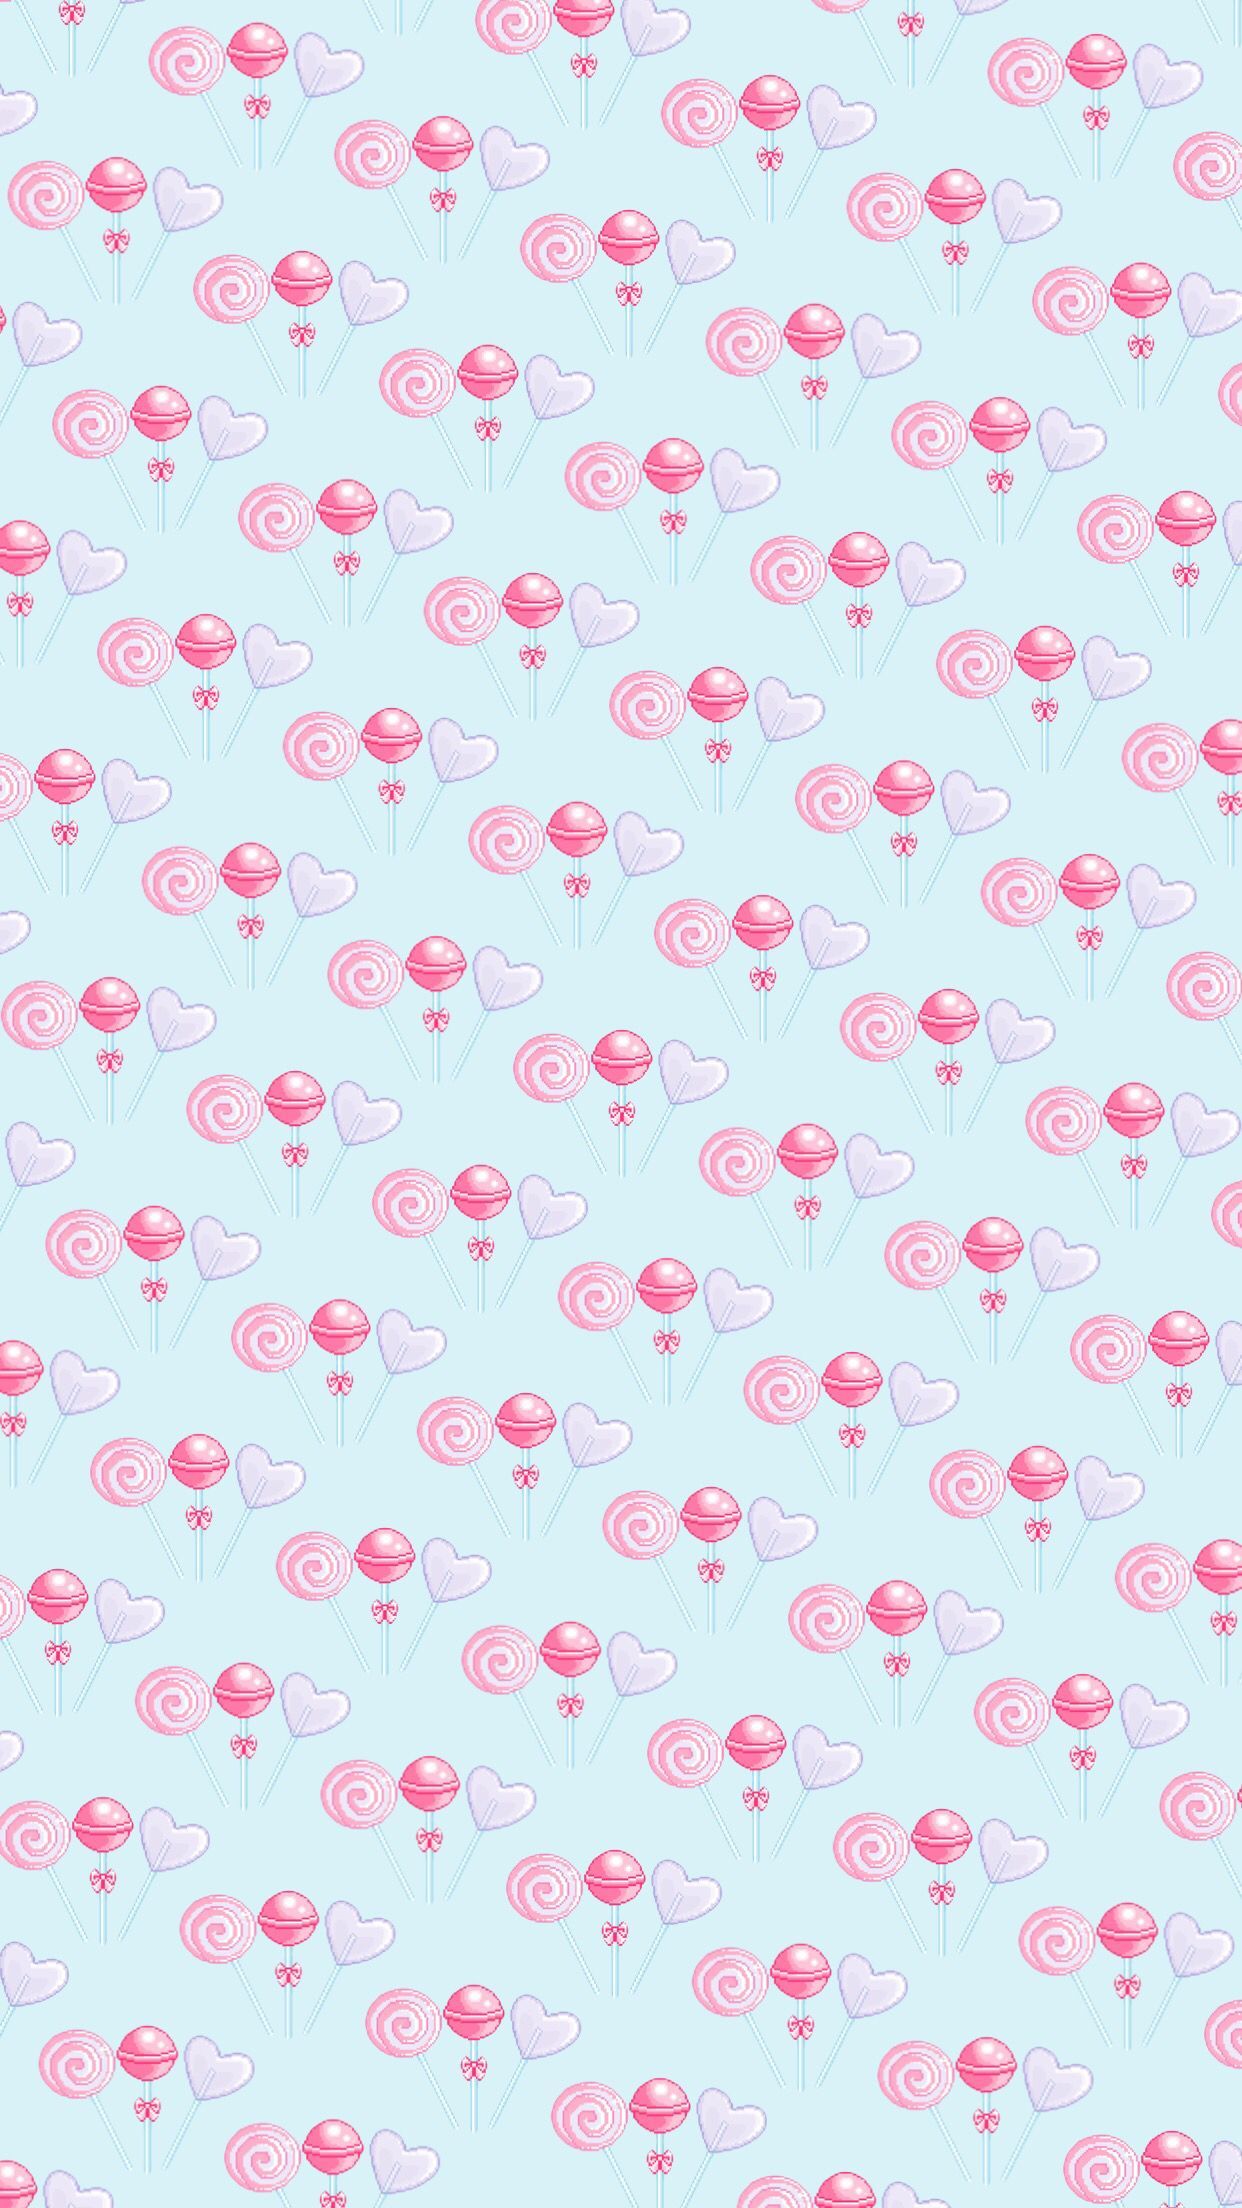 Pastel lollipops wallpaper, background, iPhone, android, cute, blue, pink. Girl wallpaper, Galaxy wallpaper, iPhone wallpaper